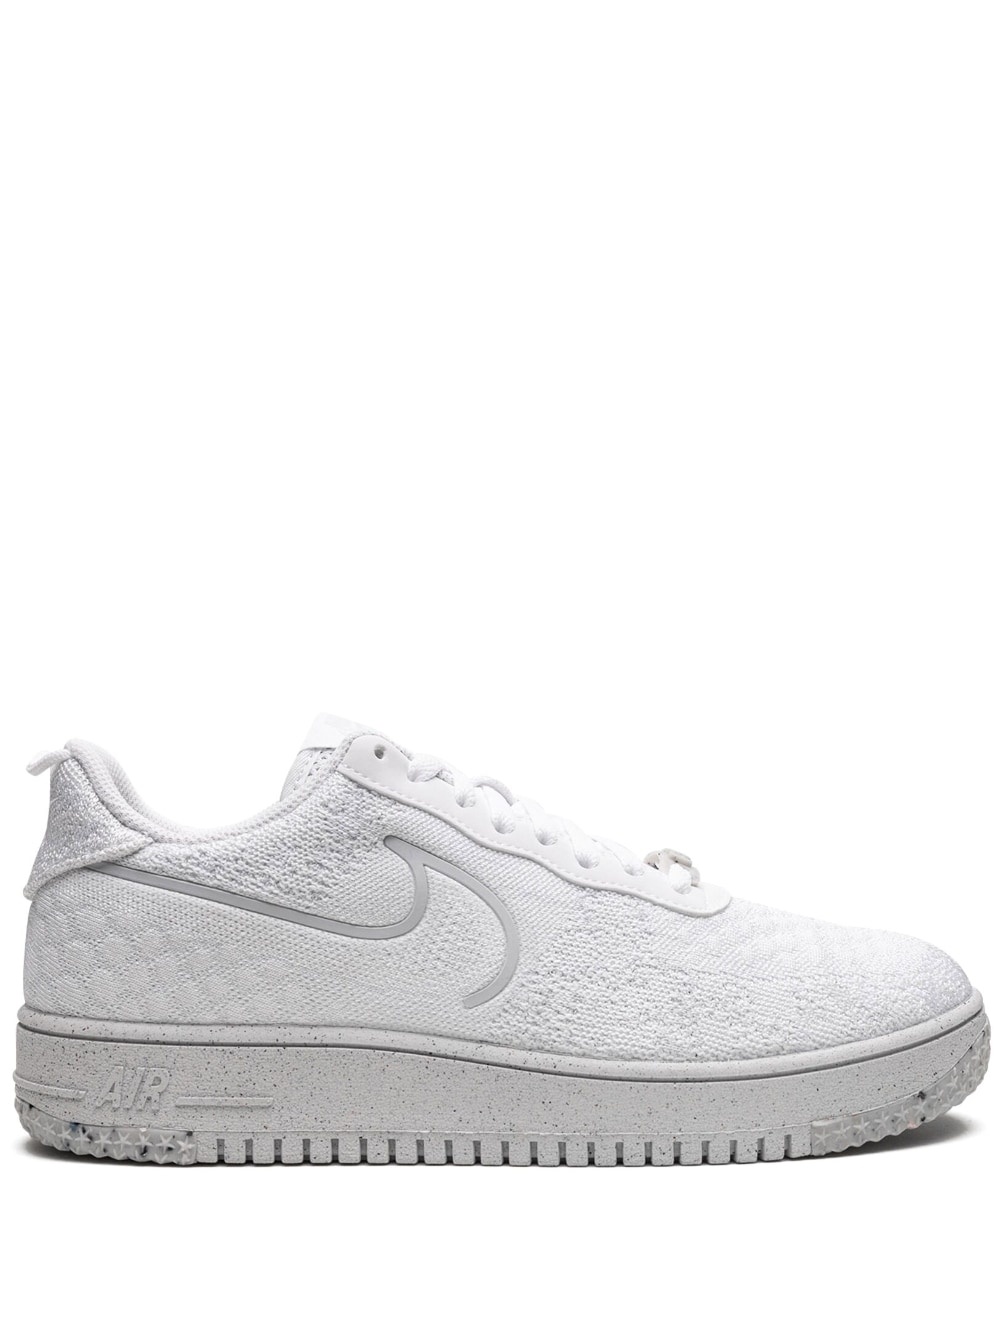 AF1 Crater Flyknit Nn "Whiteout" sneakers - 1